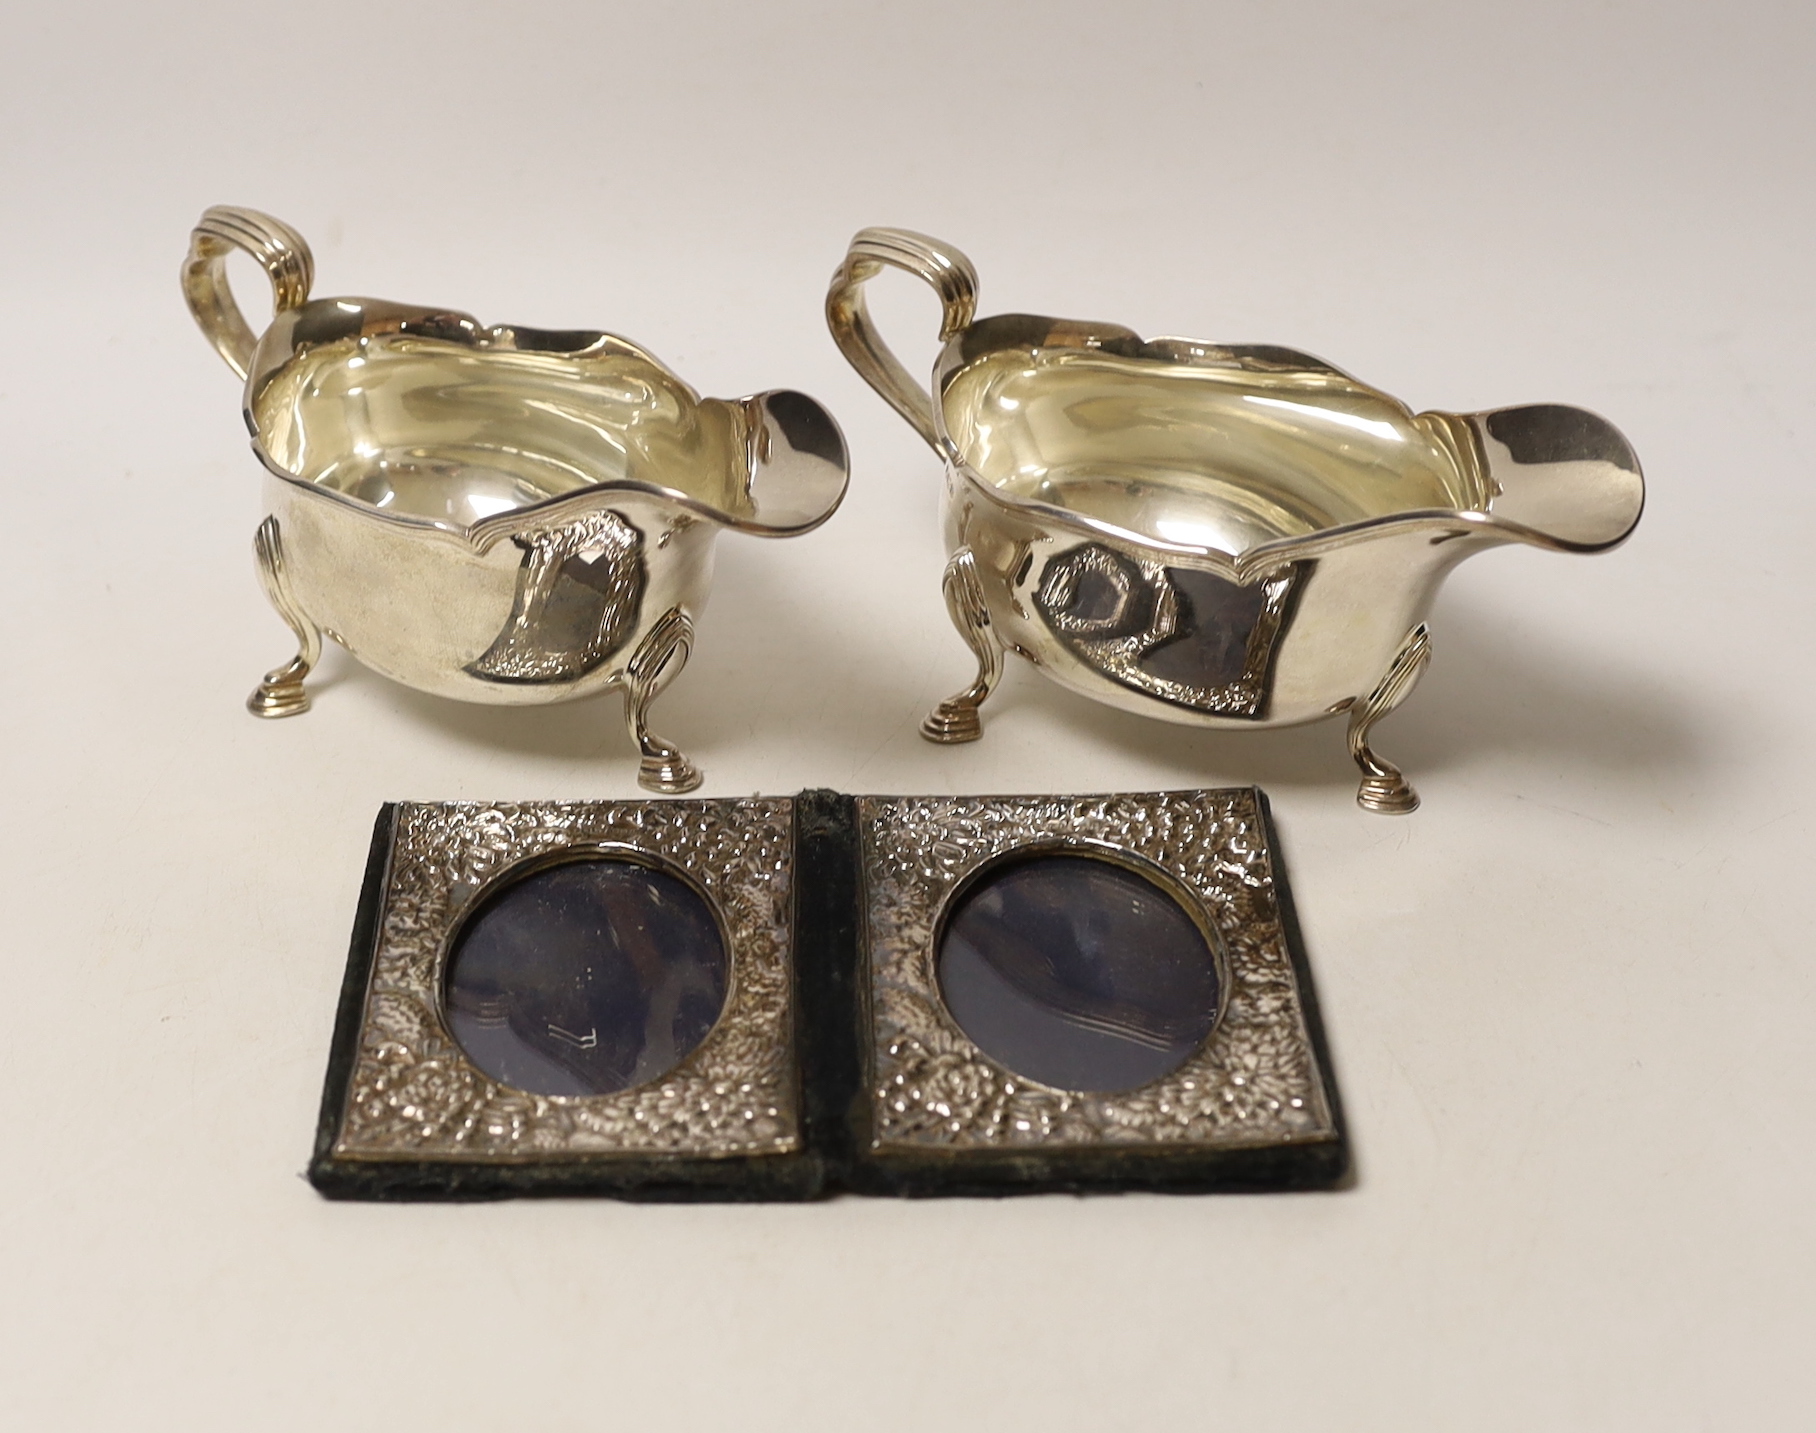 A pair of George V silver sauce boats, Atkin Brothers, Sheffield, 1927, 15.1oz, together with a modern silver mounted double photograph frame.